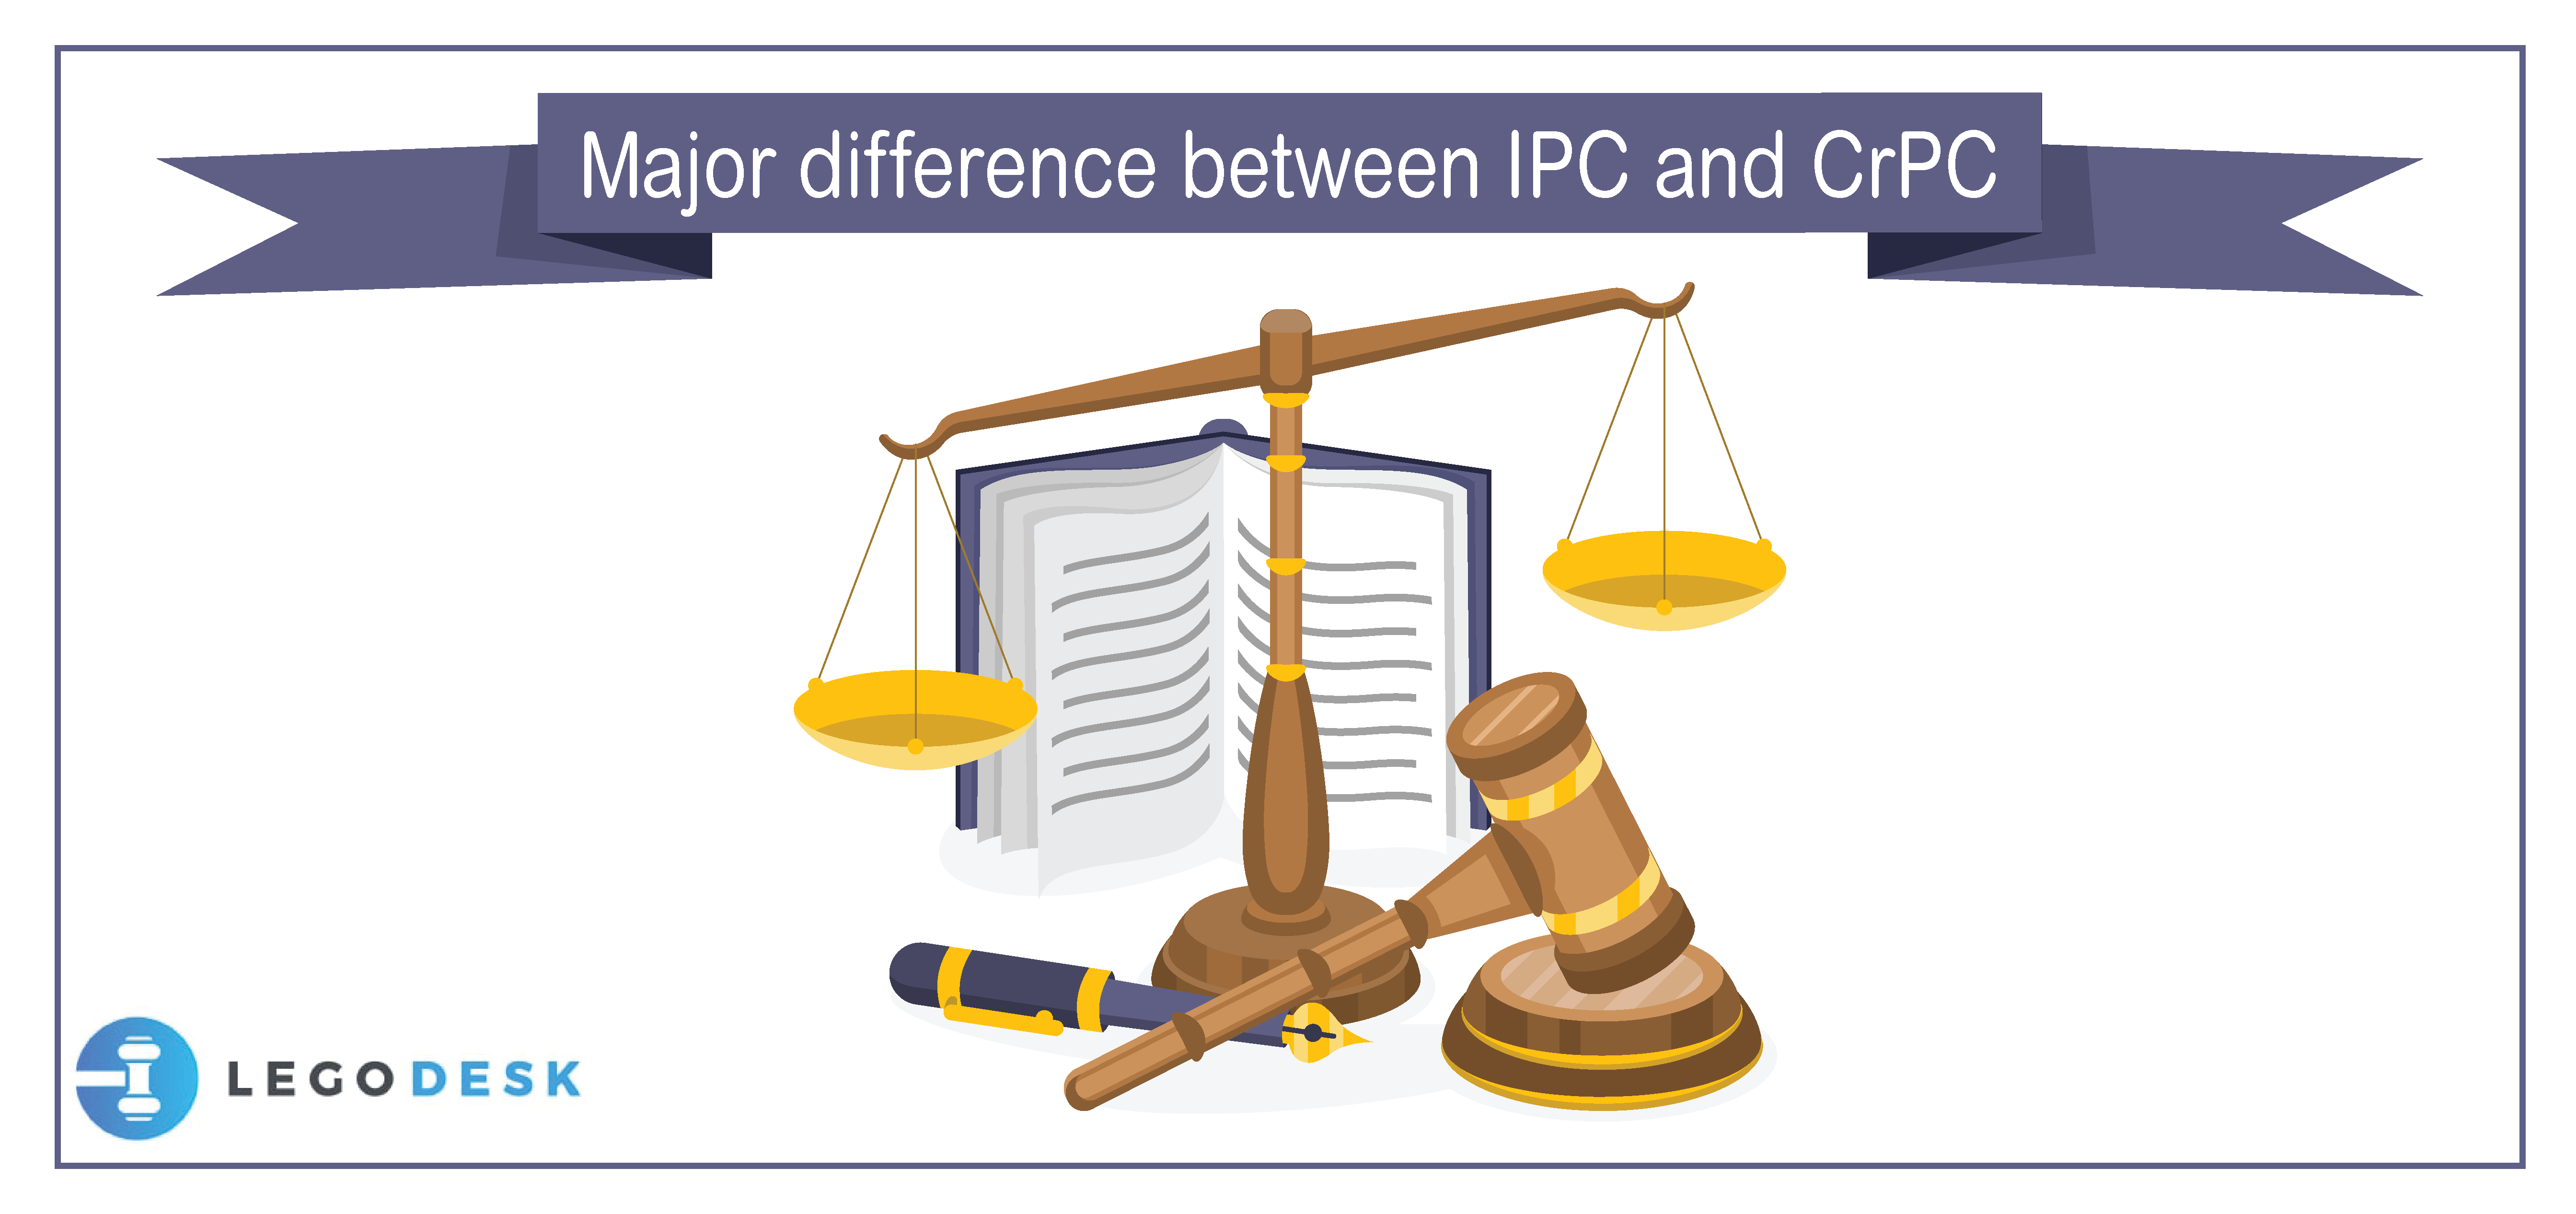 Key differences between IPC and CrPC